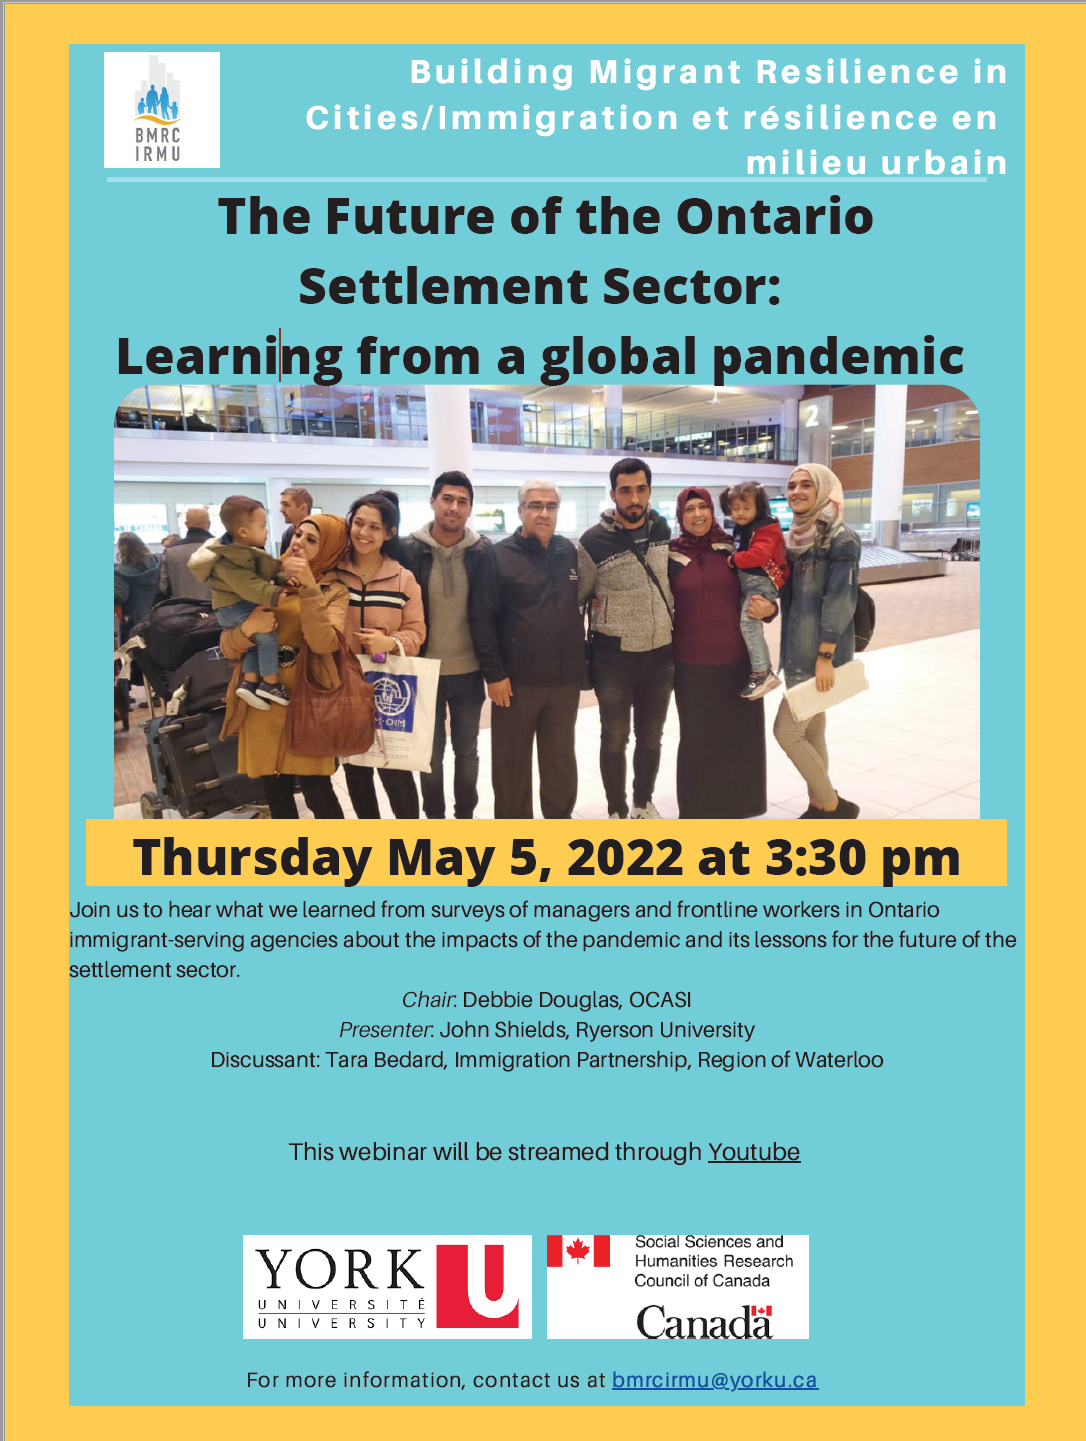 The Future of the Ontario Settlement Sector: Learning from a global pandemic